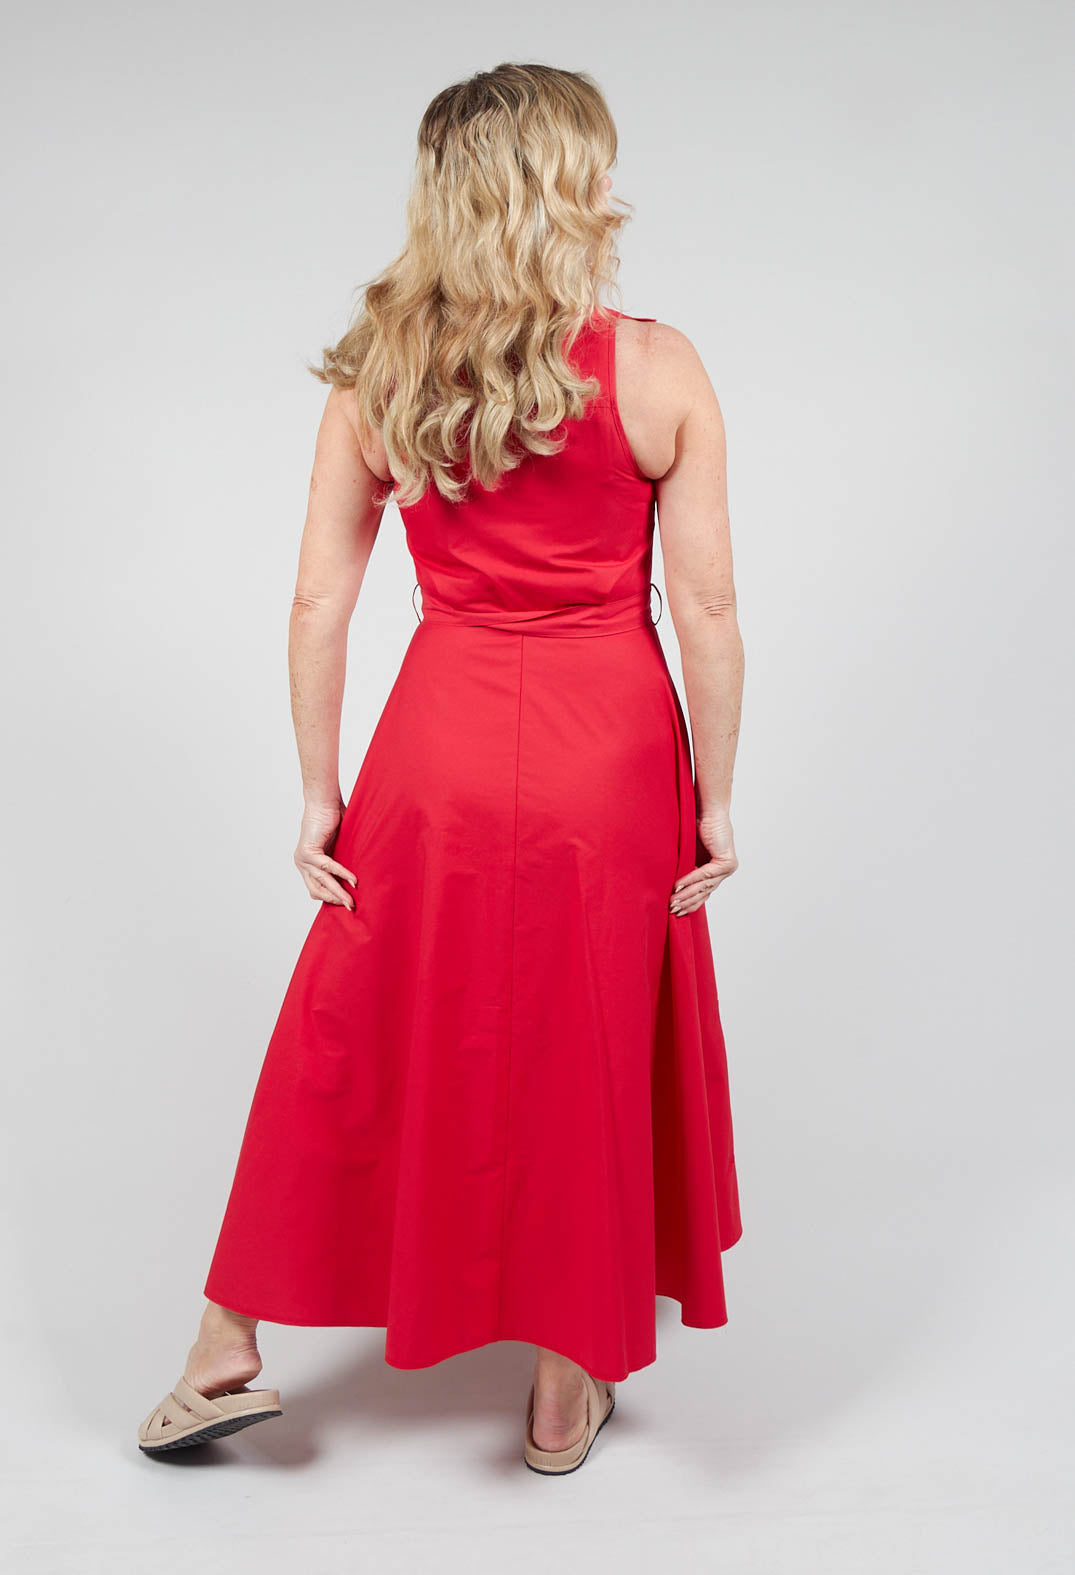 angle from behind of lady wearing red collared sleeveless dress